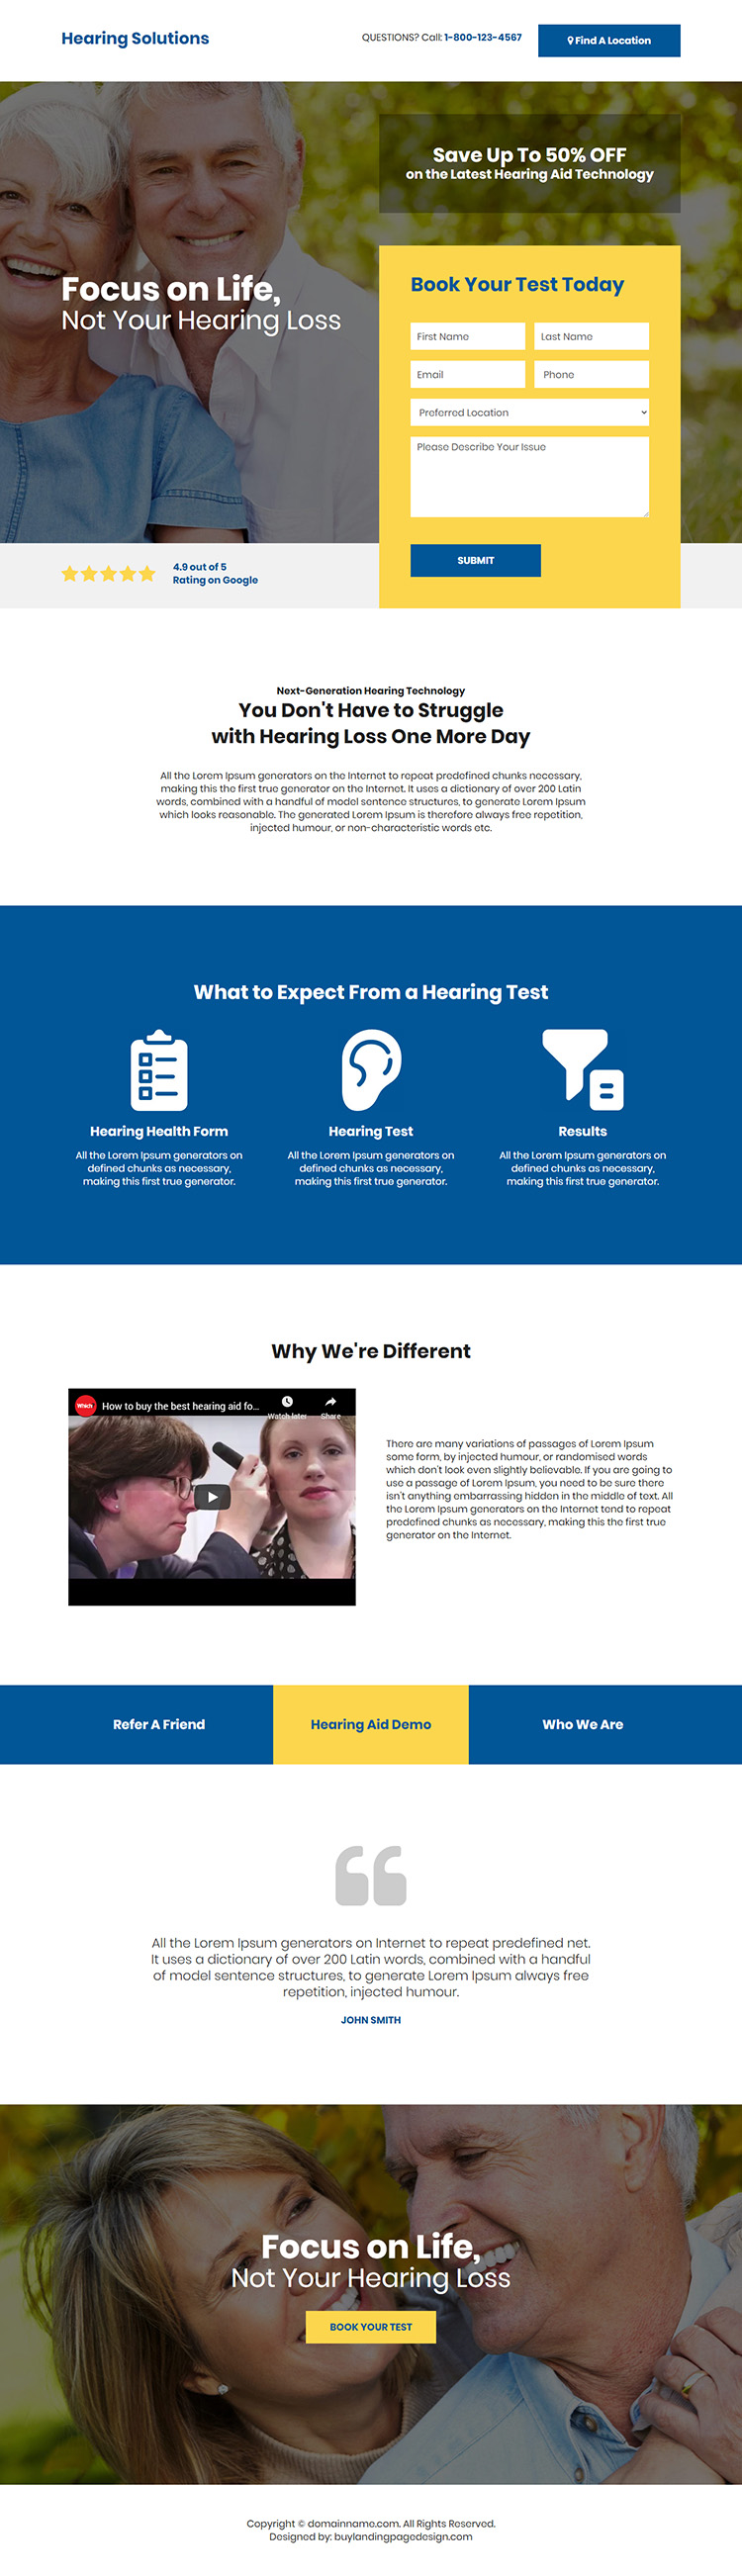 hearing solution test booking responsive landing page design